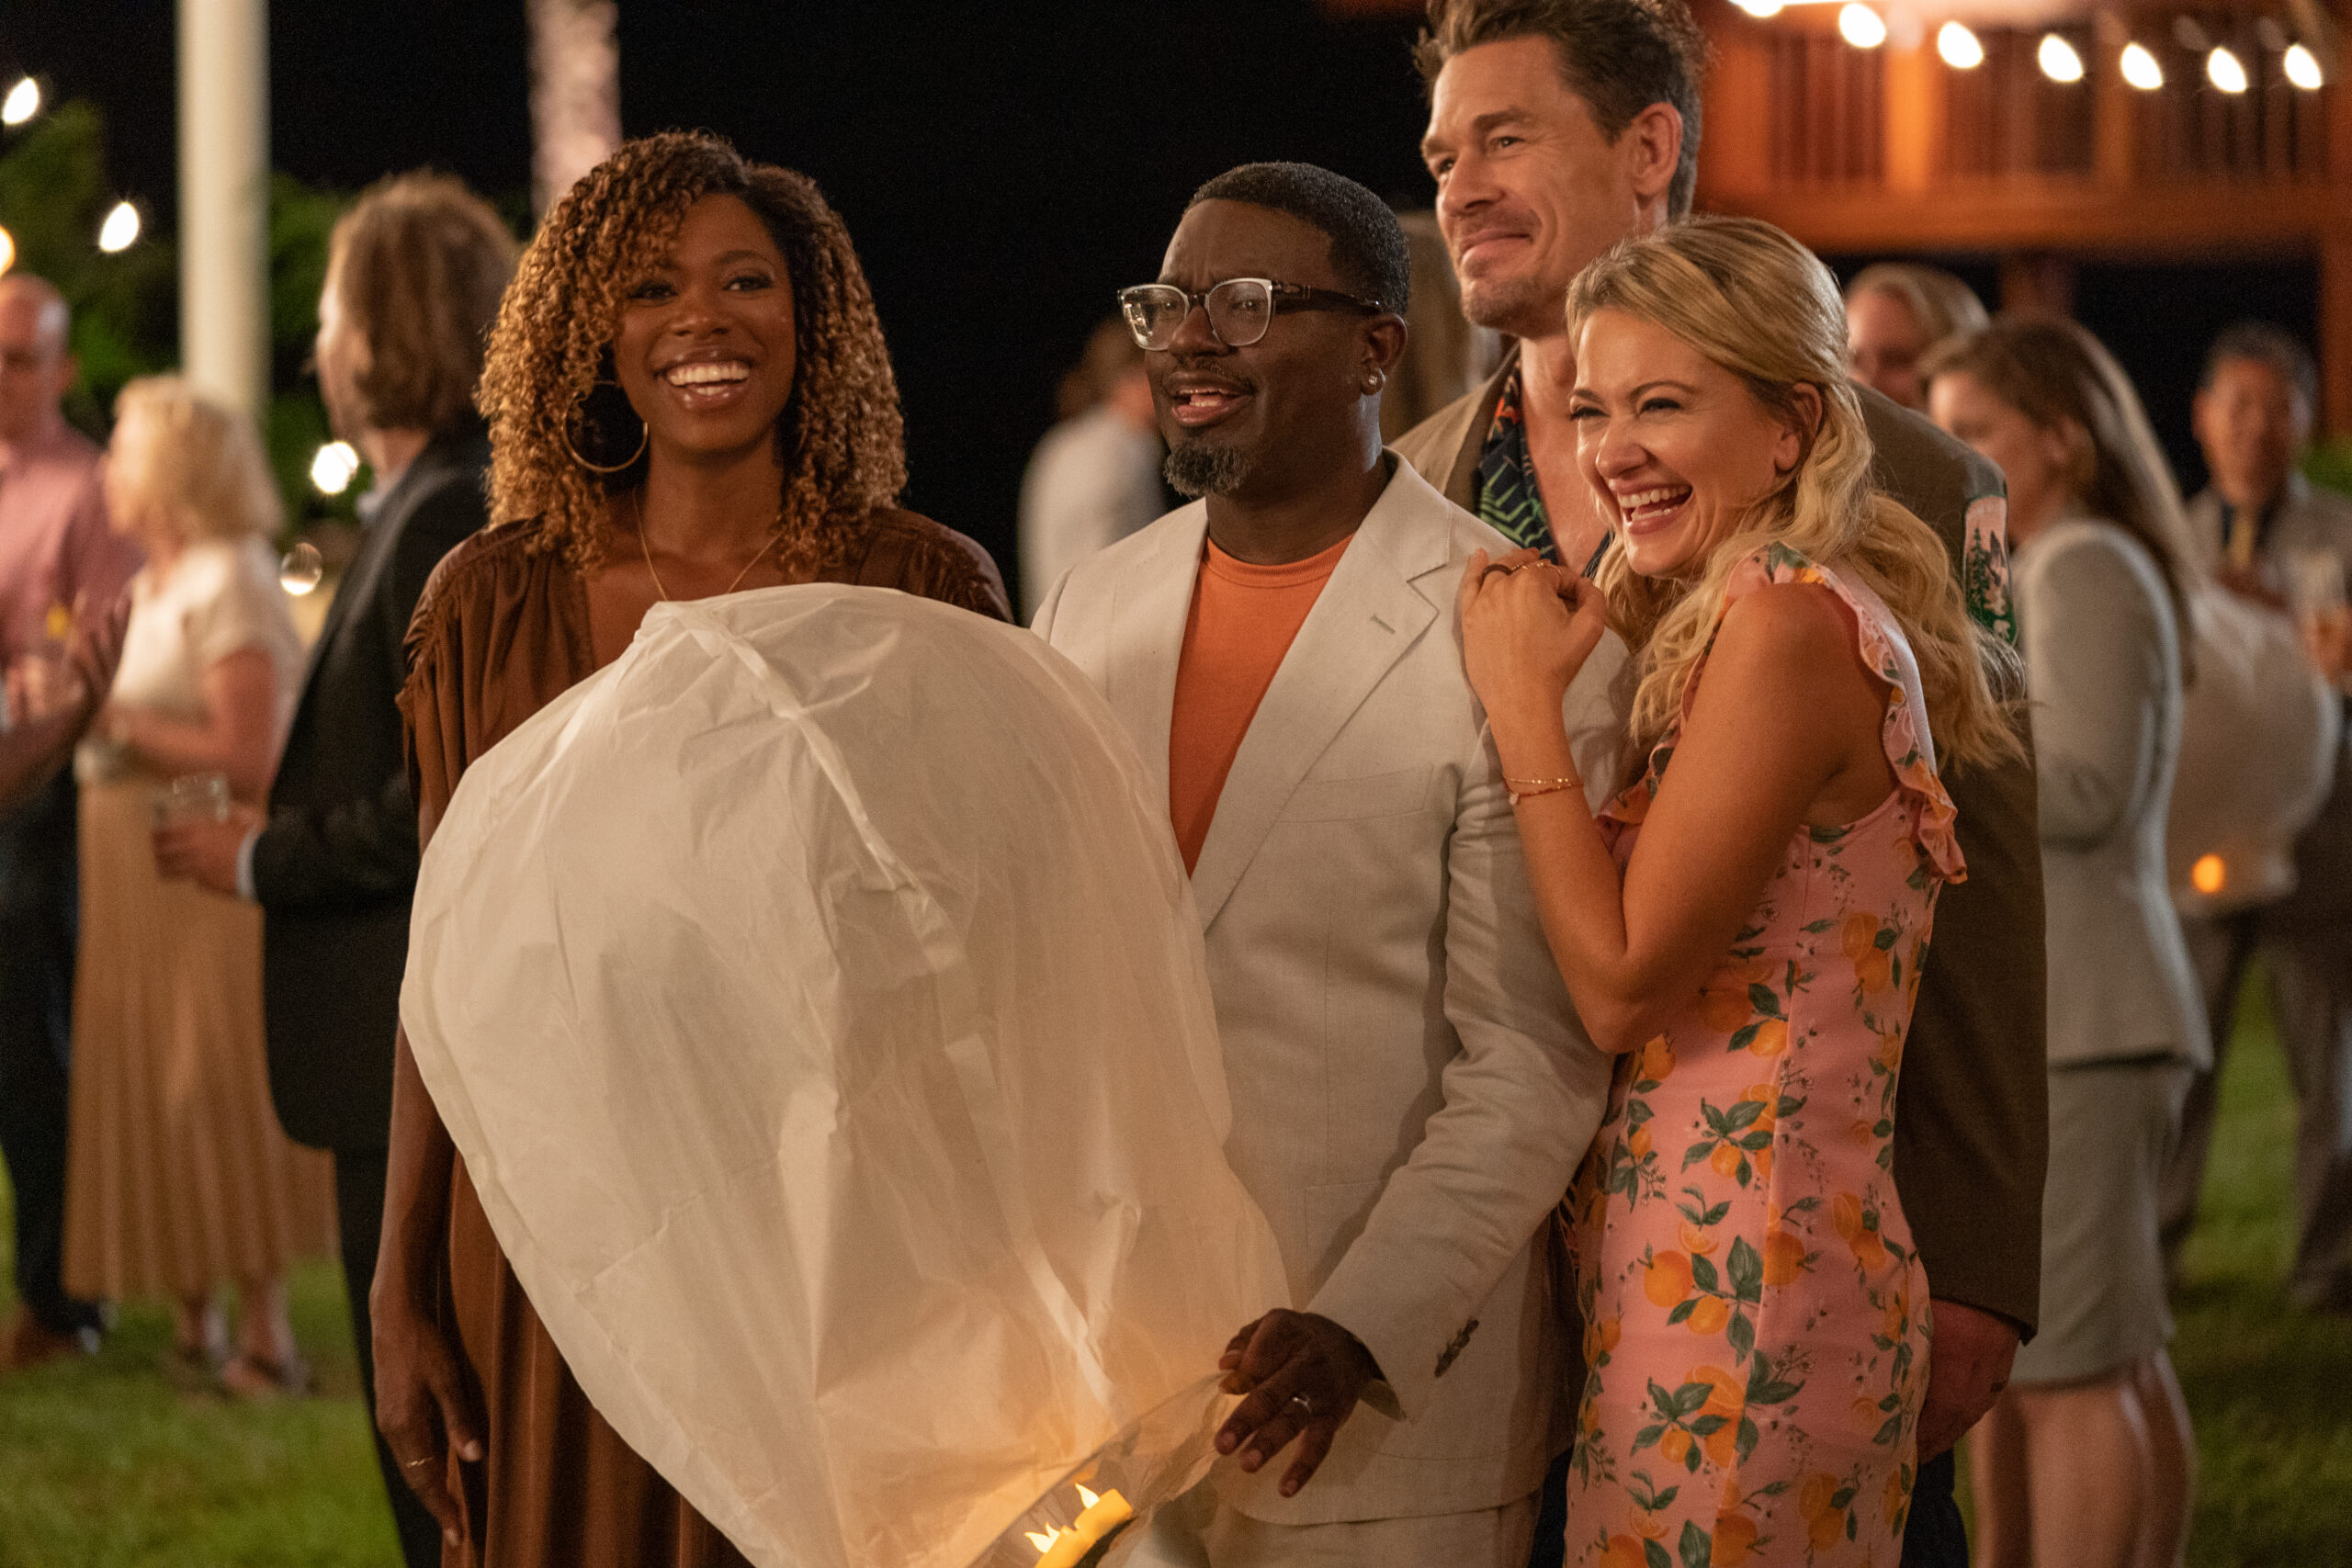 Yvonne Orji, Lil Rel Howery, John Cena, and Meredith Hagner in Clay Tarver's Hulu action adventure comedy film, Vacation Friends 2